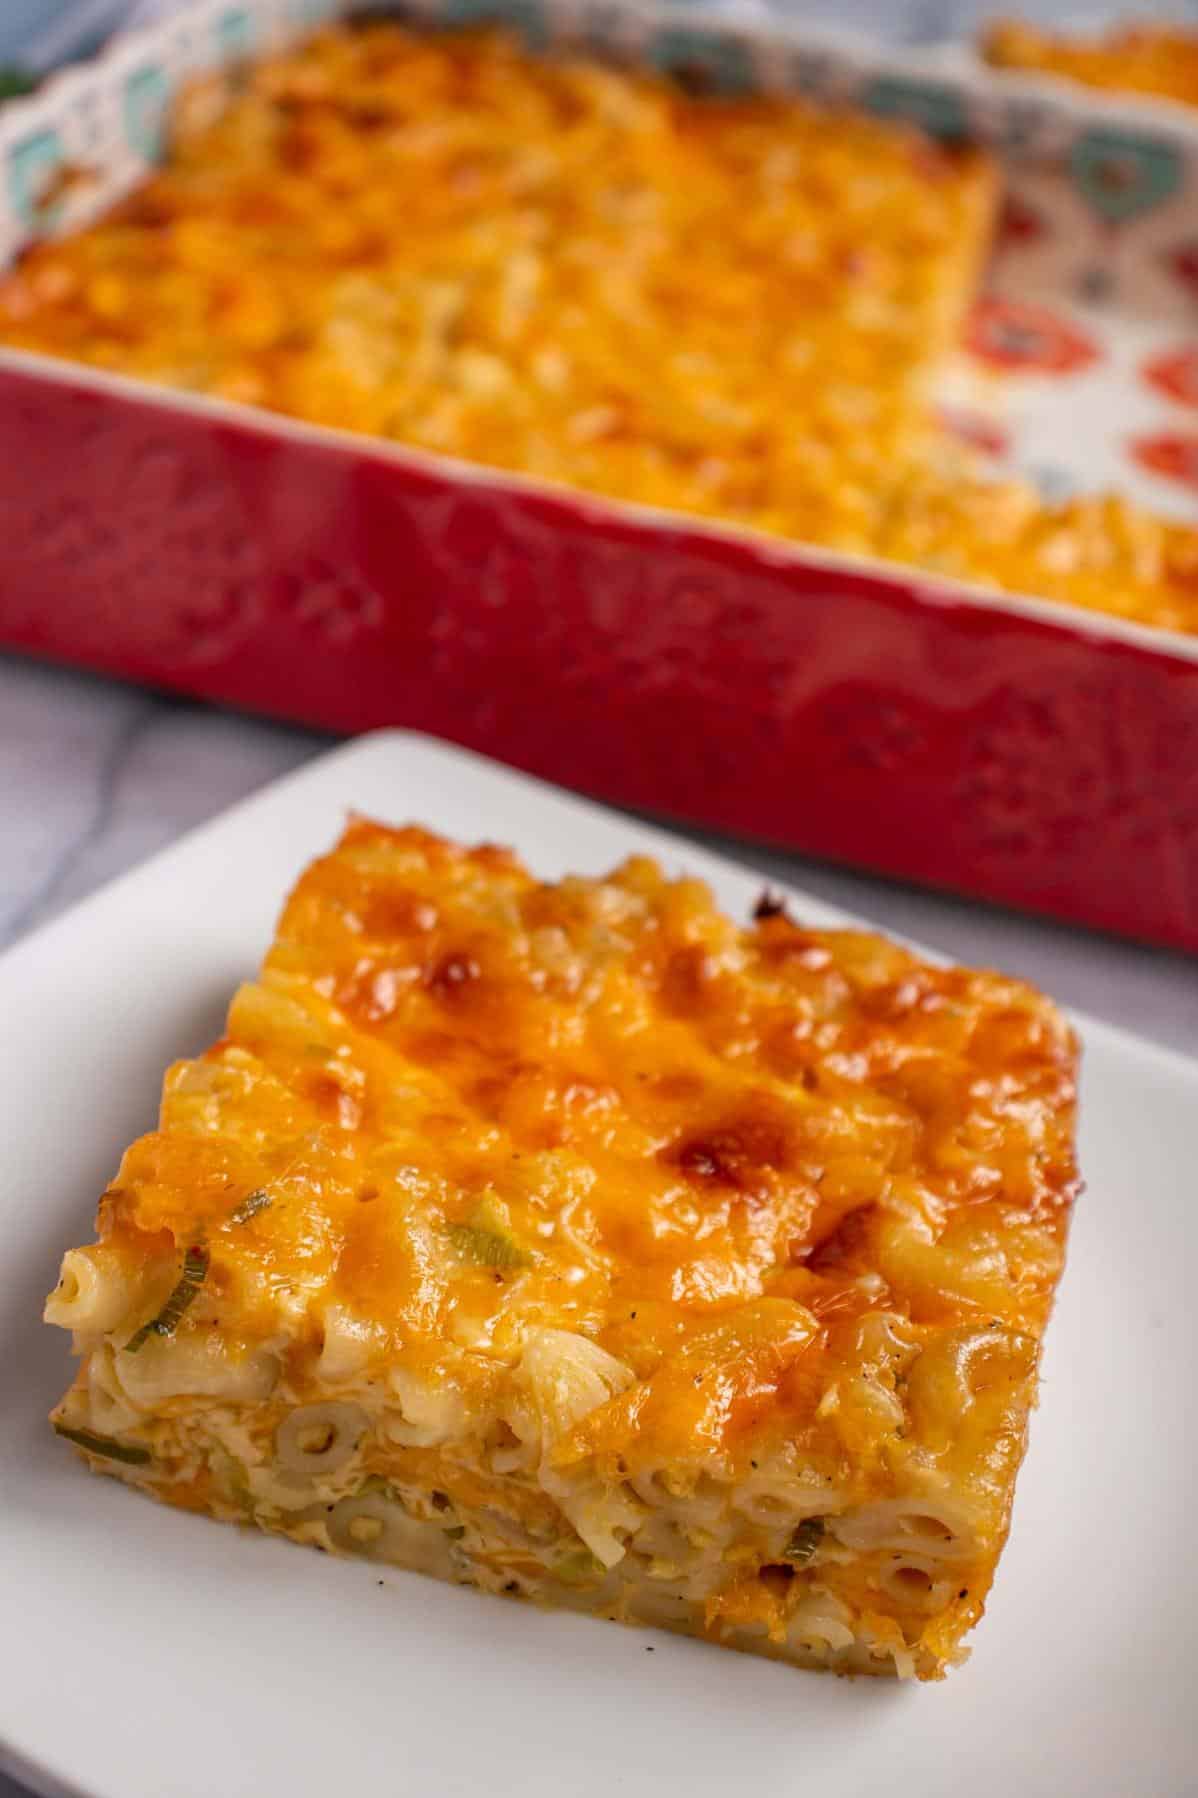  Get ready to dive into ooey-gooey goodness with this Macaroni Pie.